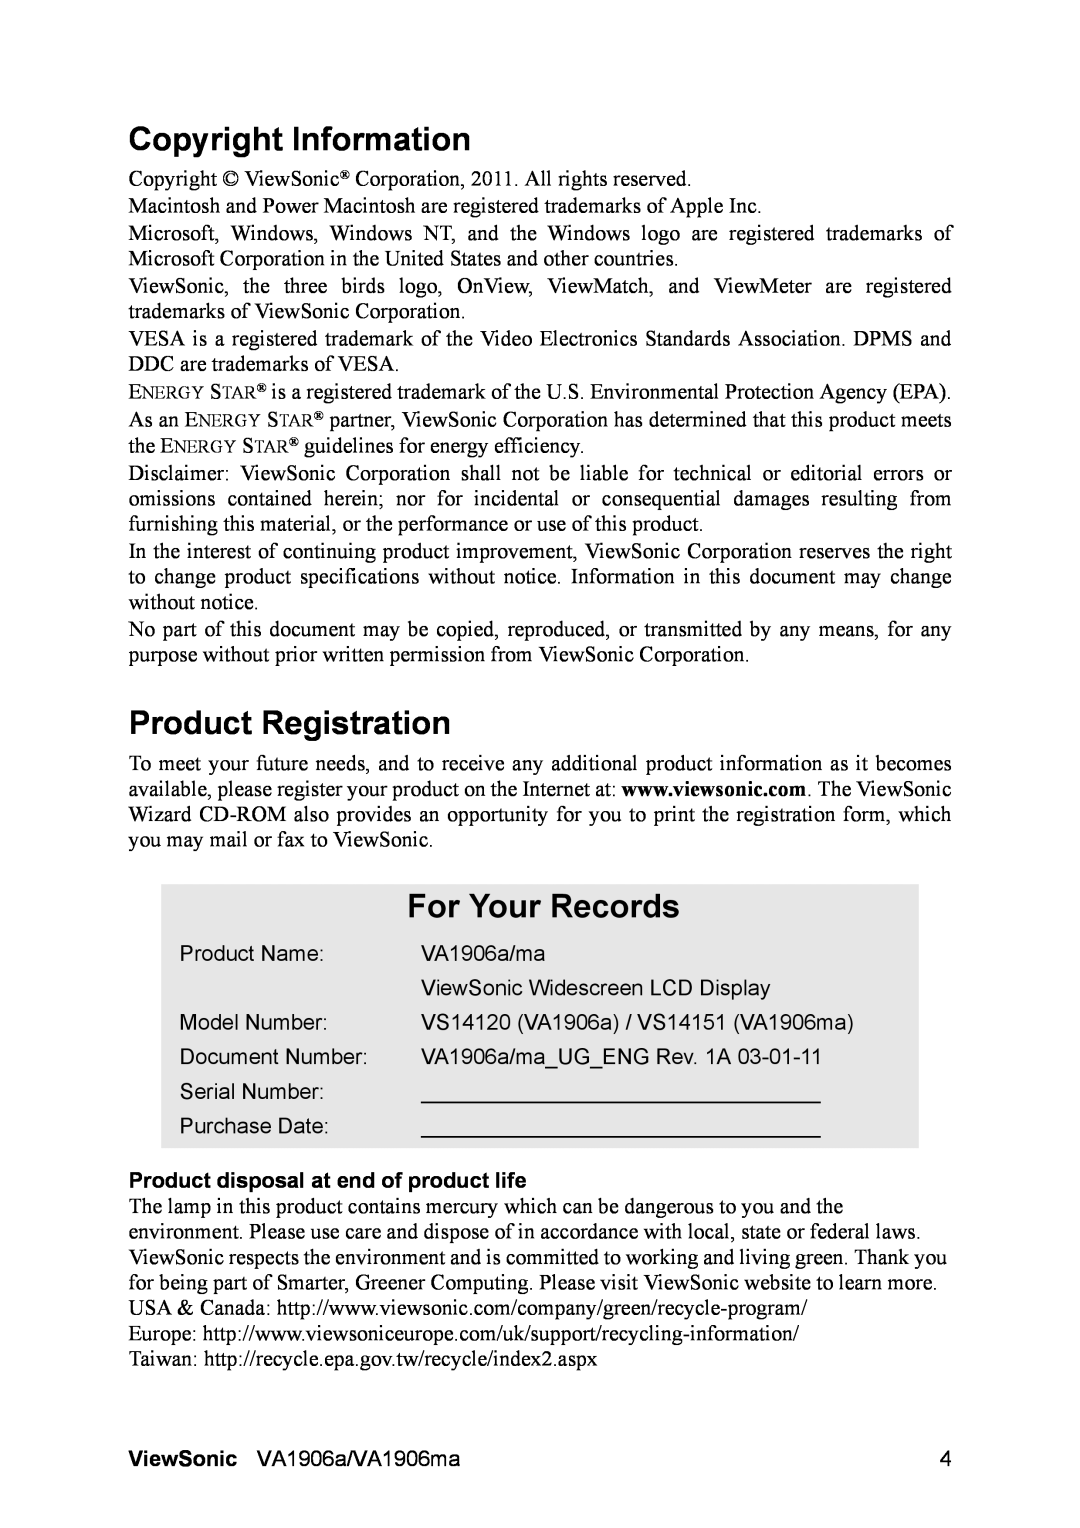 ViewSonic VS14120 Copyright Information, Product Registration, For Your Records, Product disposal at end of product life 